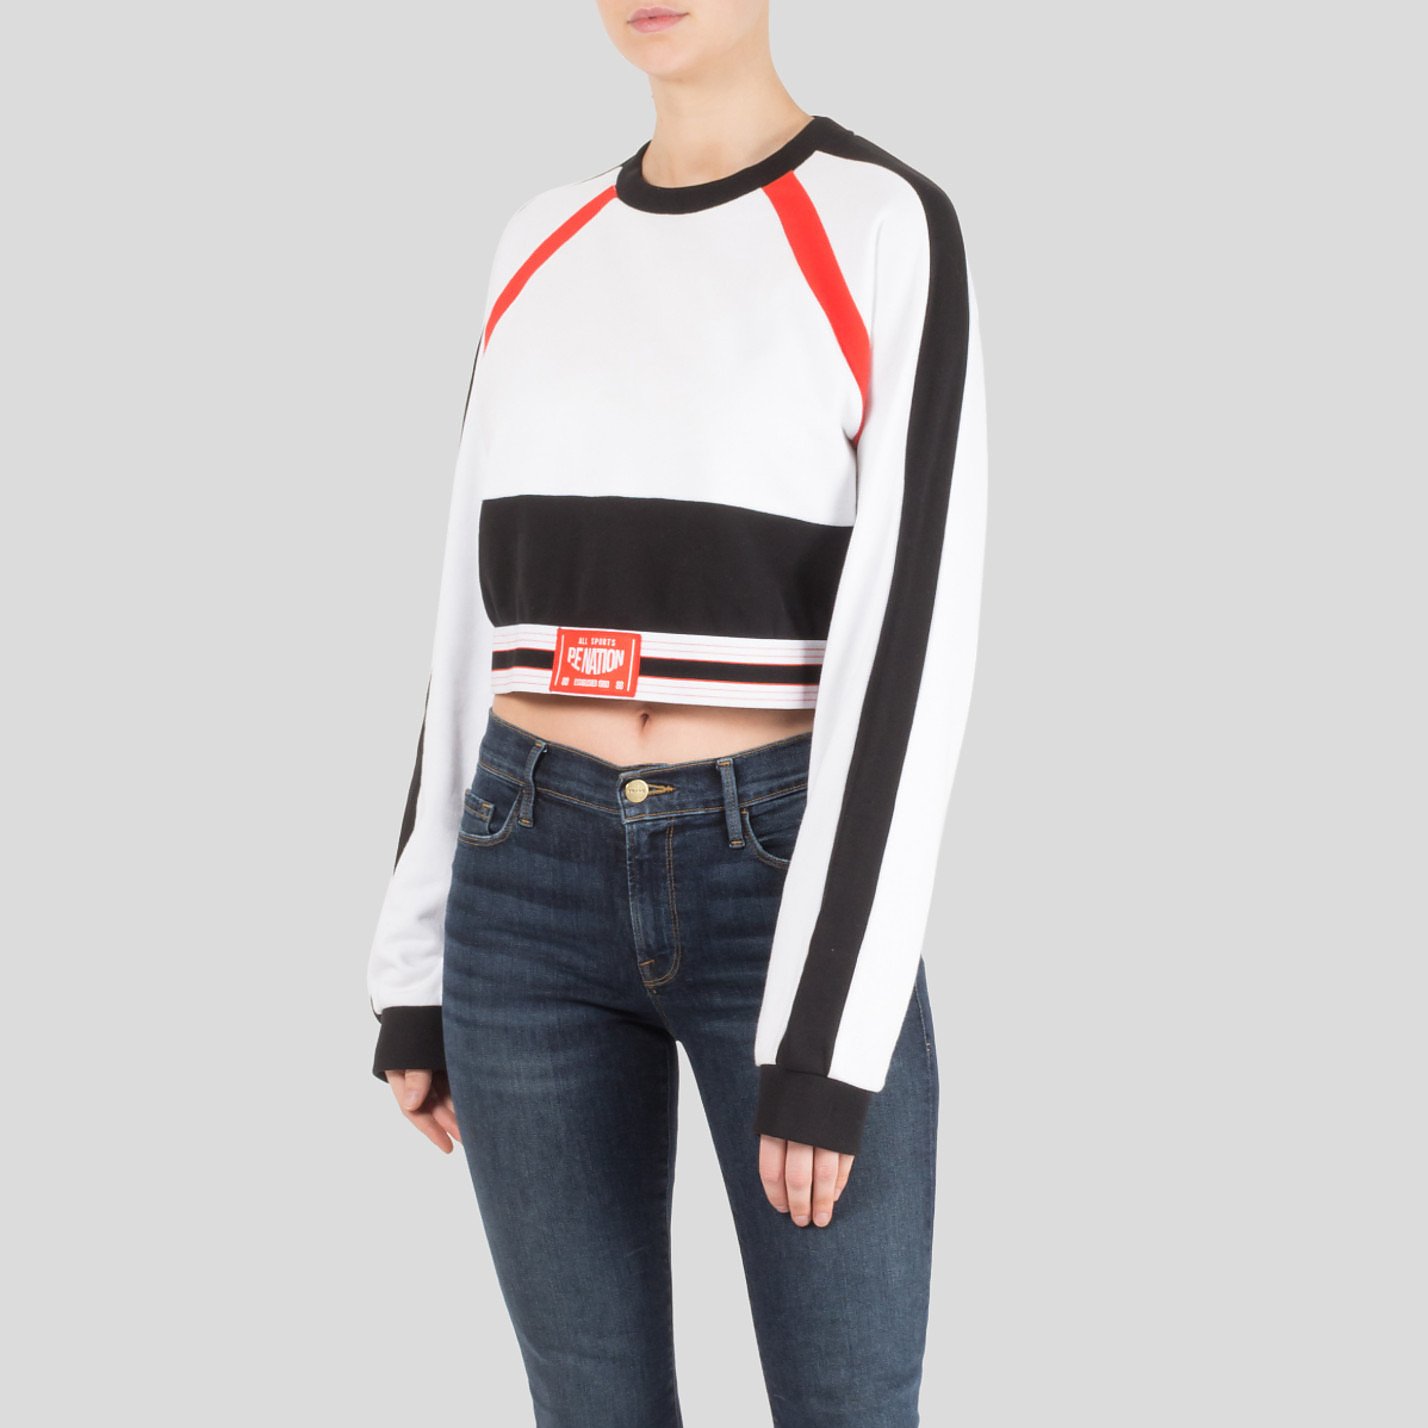 P.E Nation The Cannibal Cropped Sweatshirt